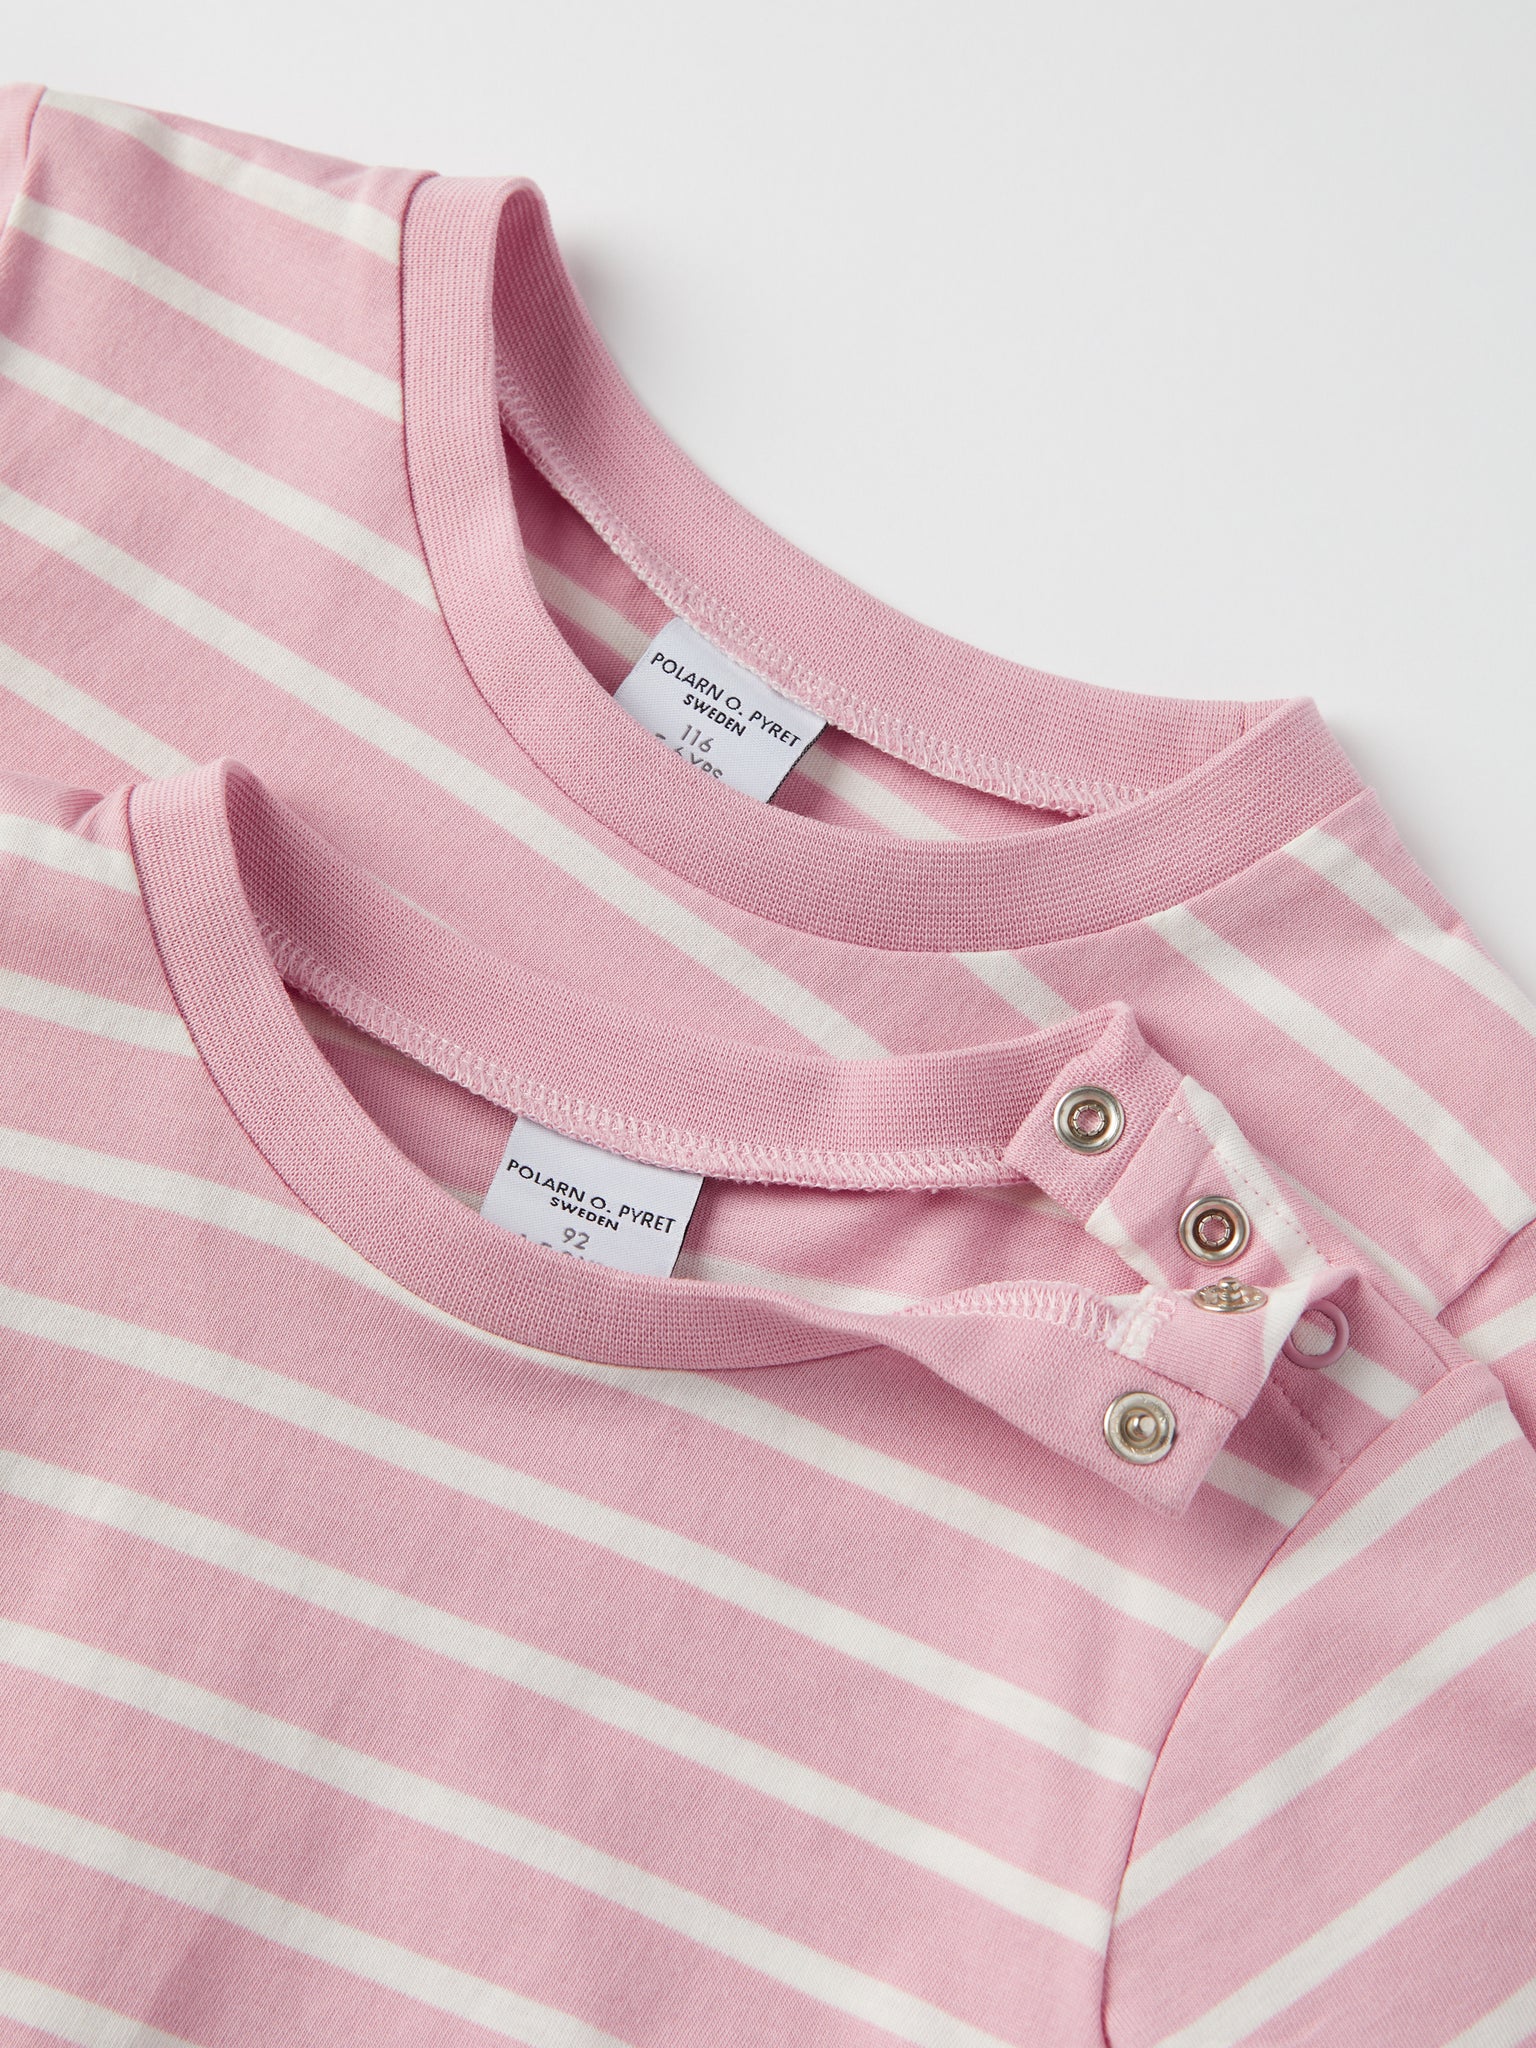 Pink Breton Stripe Kids T-Shirt from the Polarn O. Pyret kidswear collection. The best ethical kids clothes